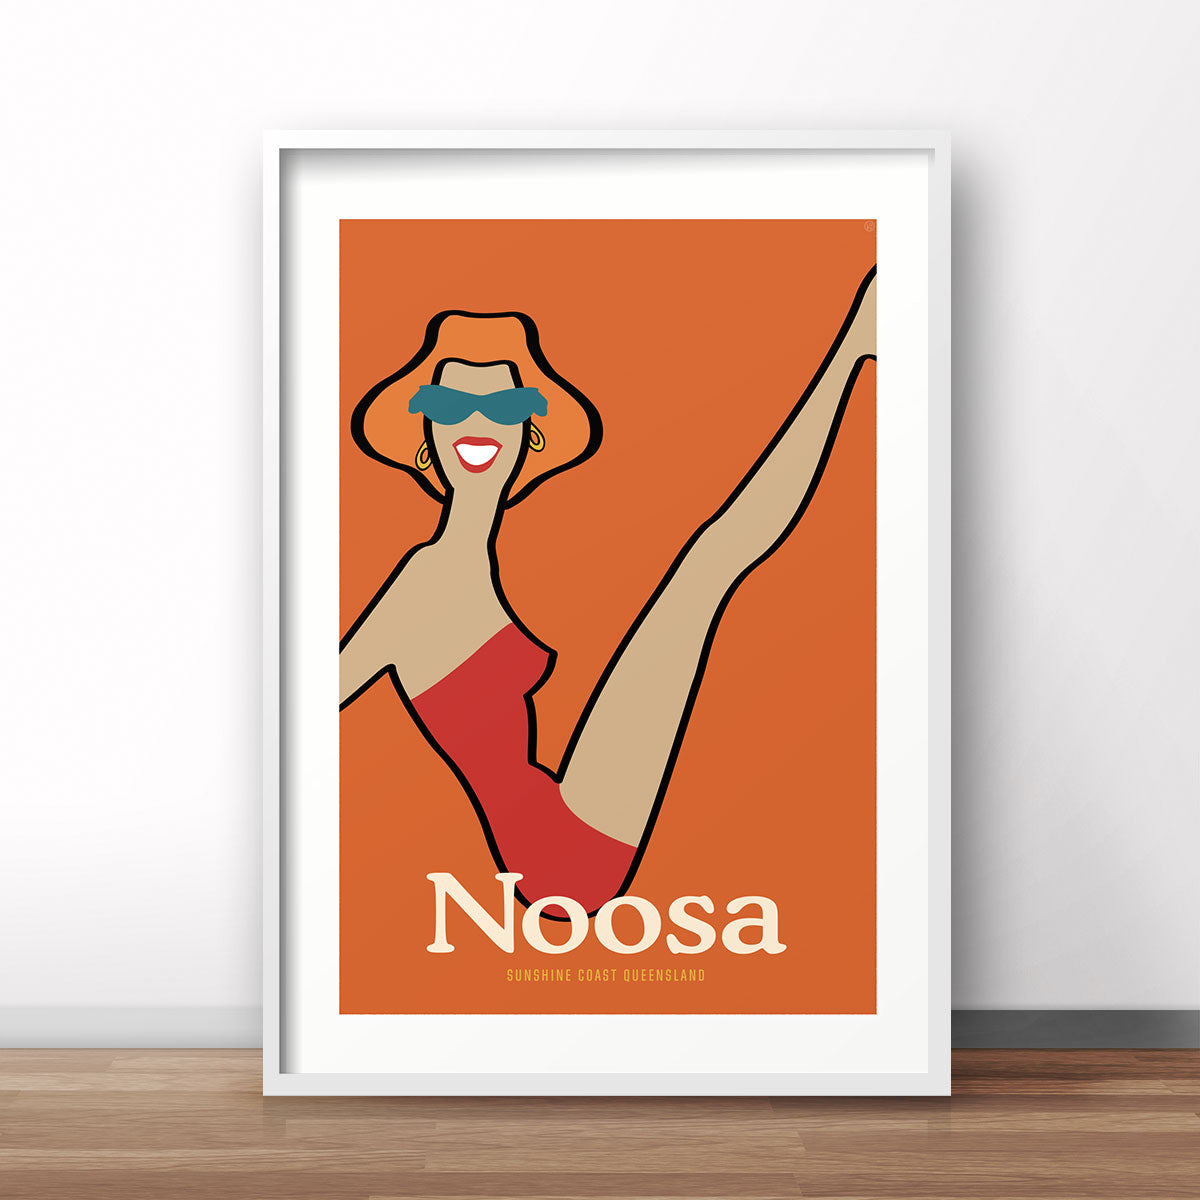 Noosa Queensland vintage retro poster print from Places We Luv